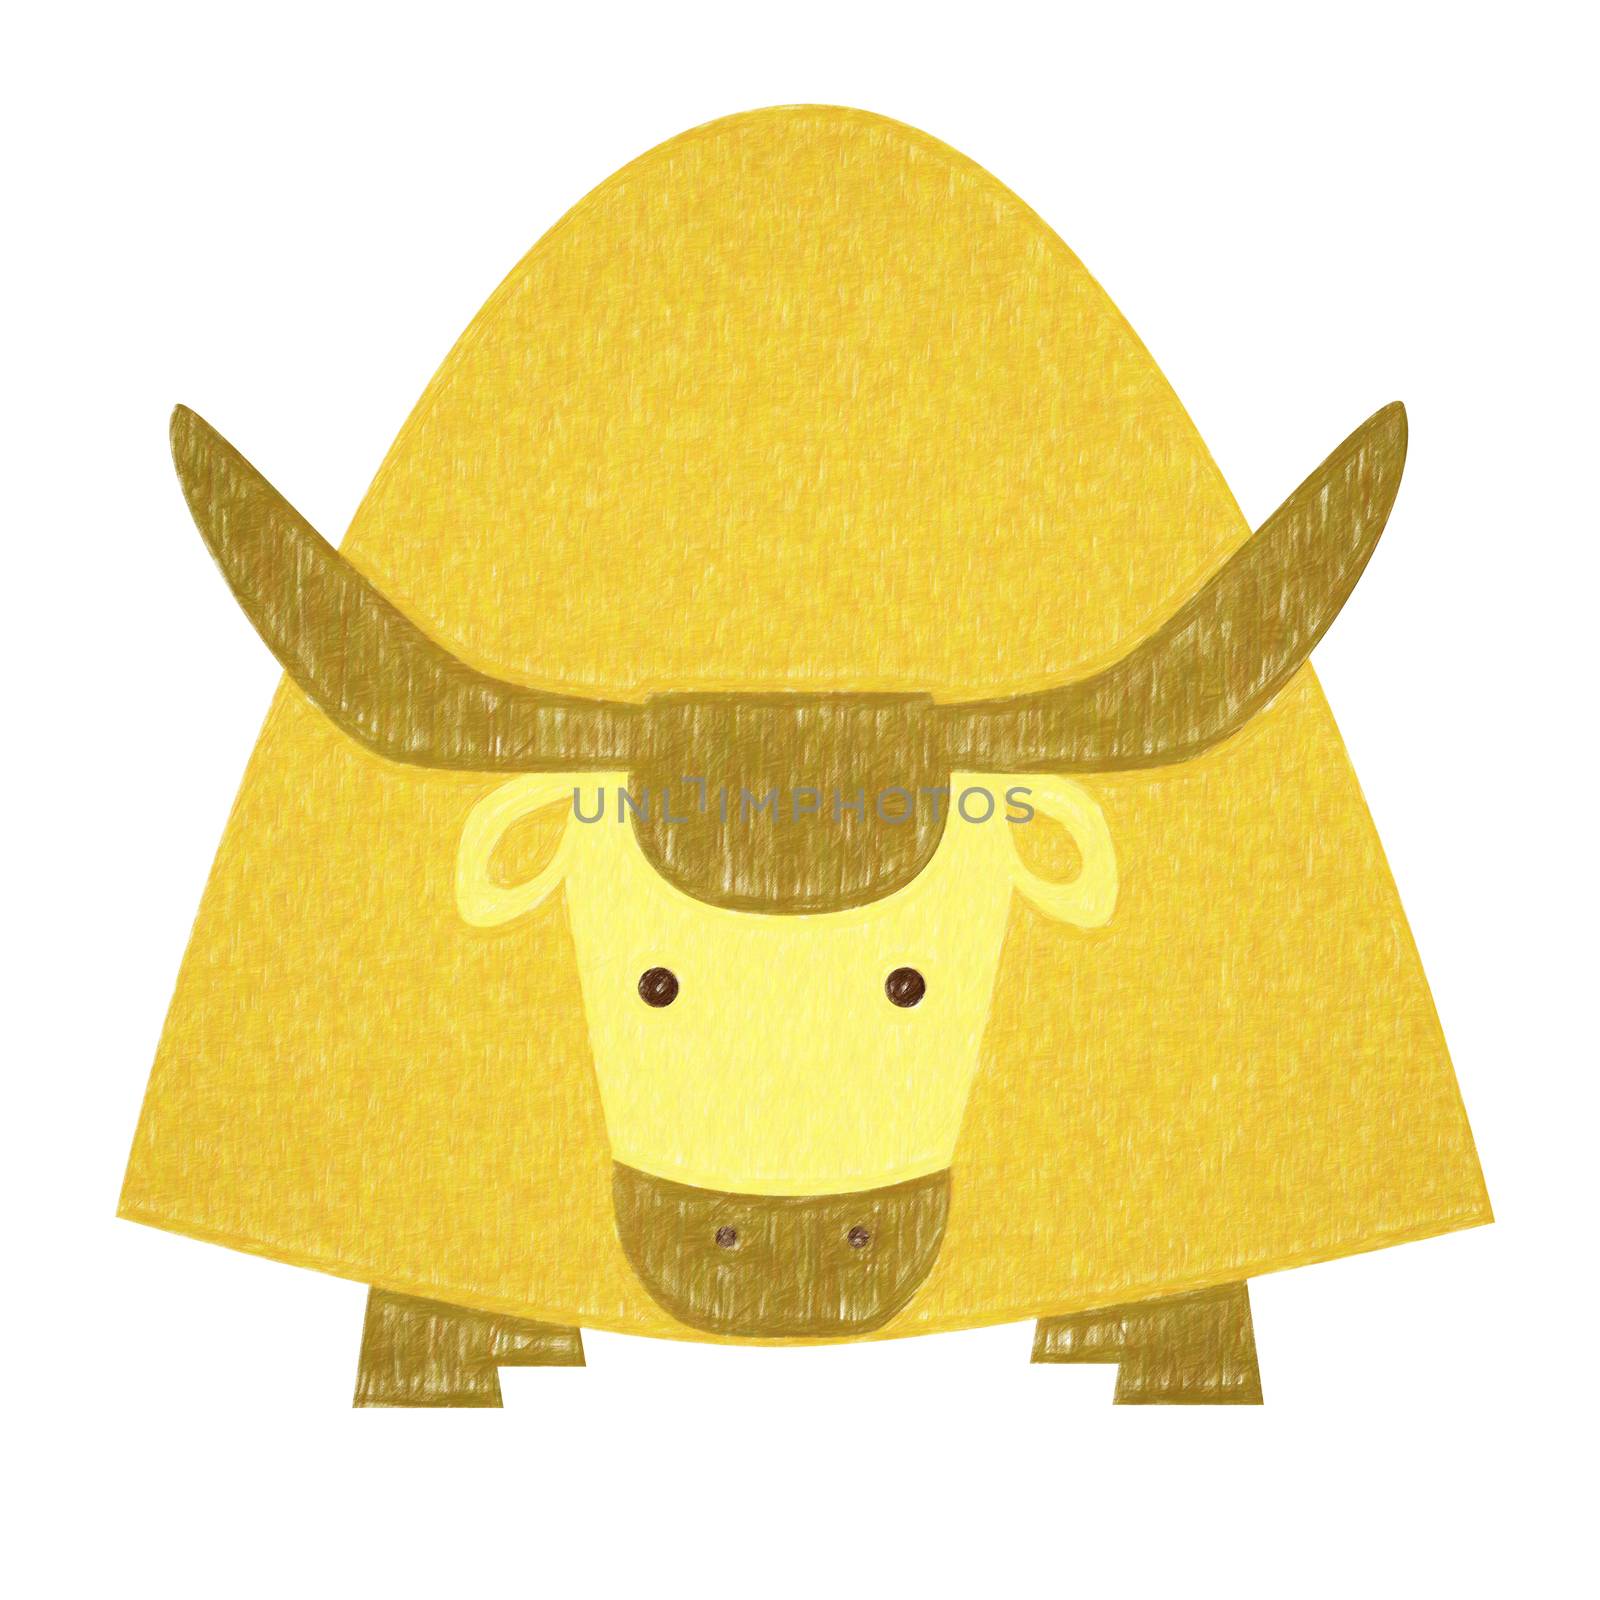 animals set - yak by Visual-Content